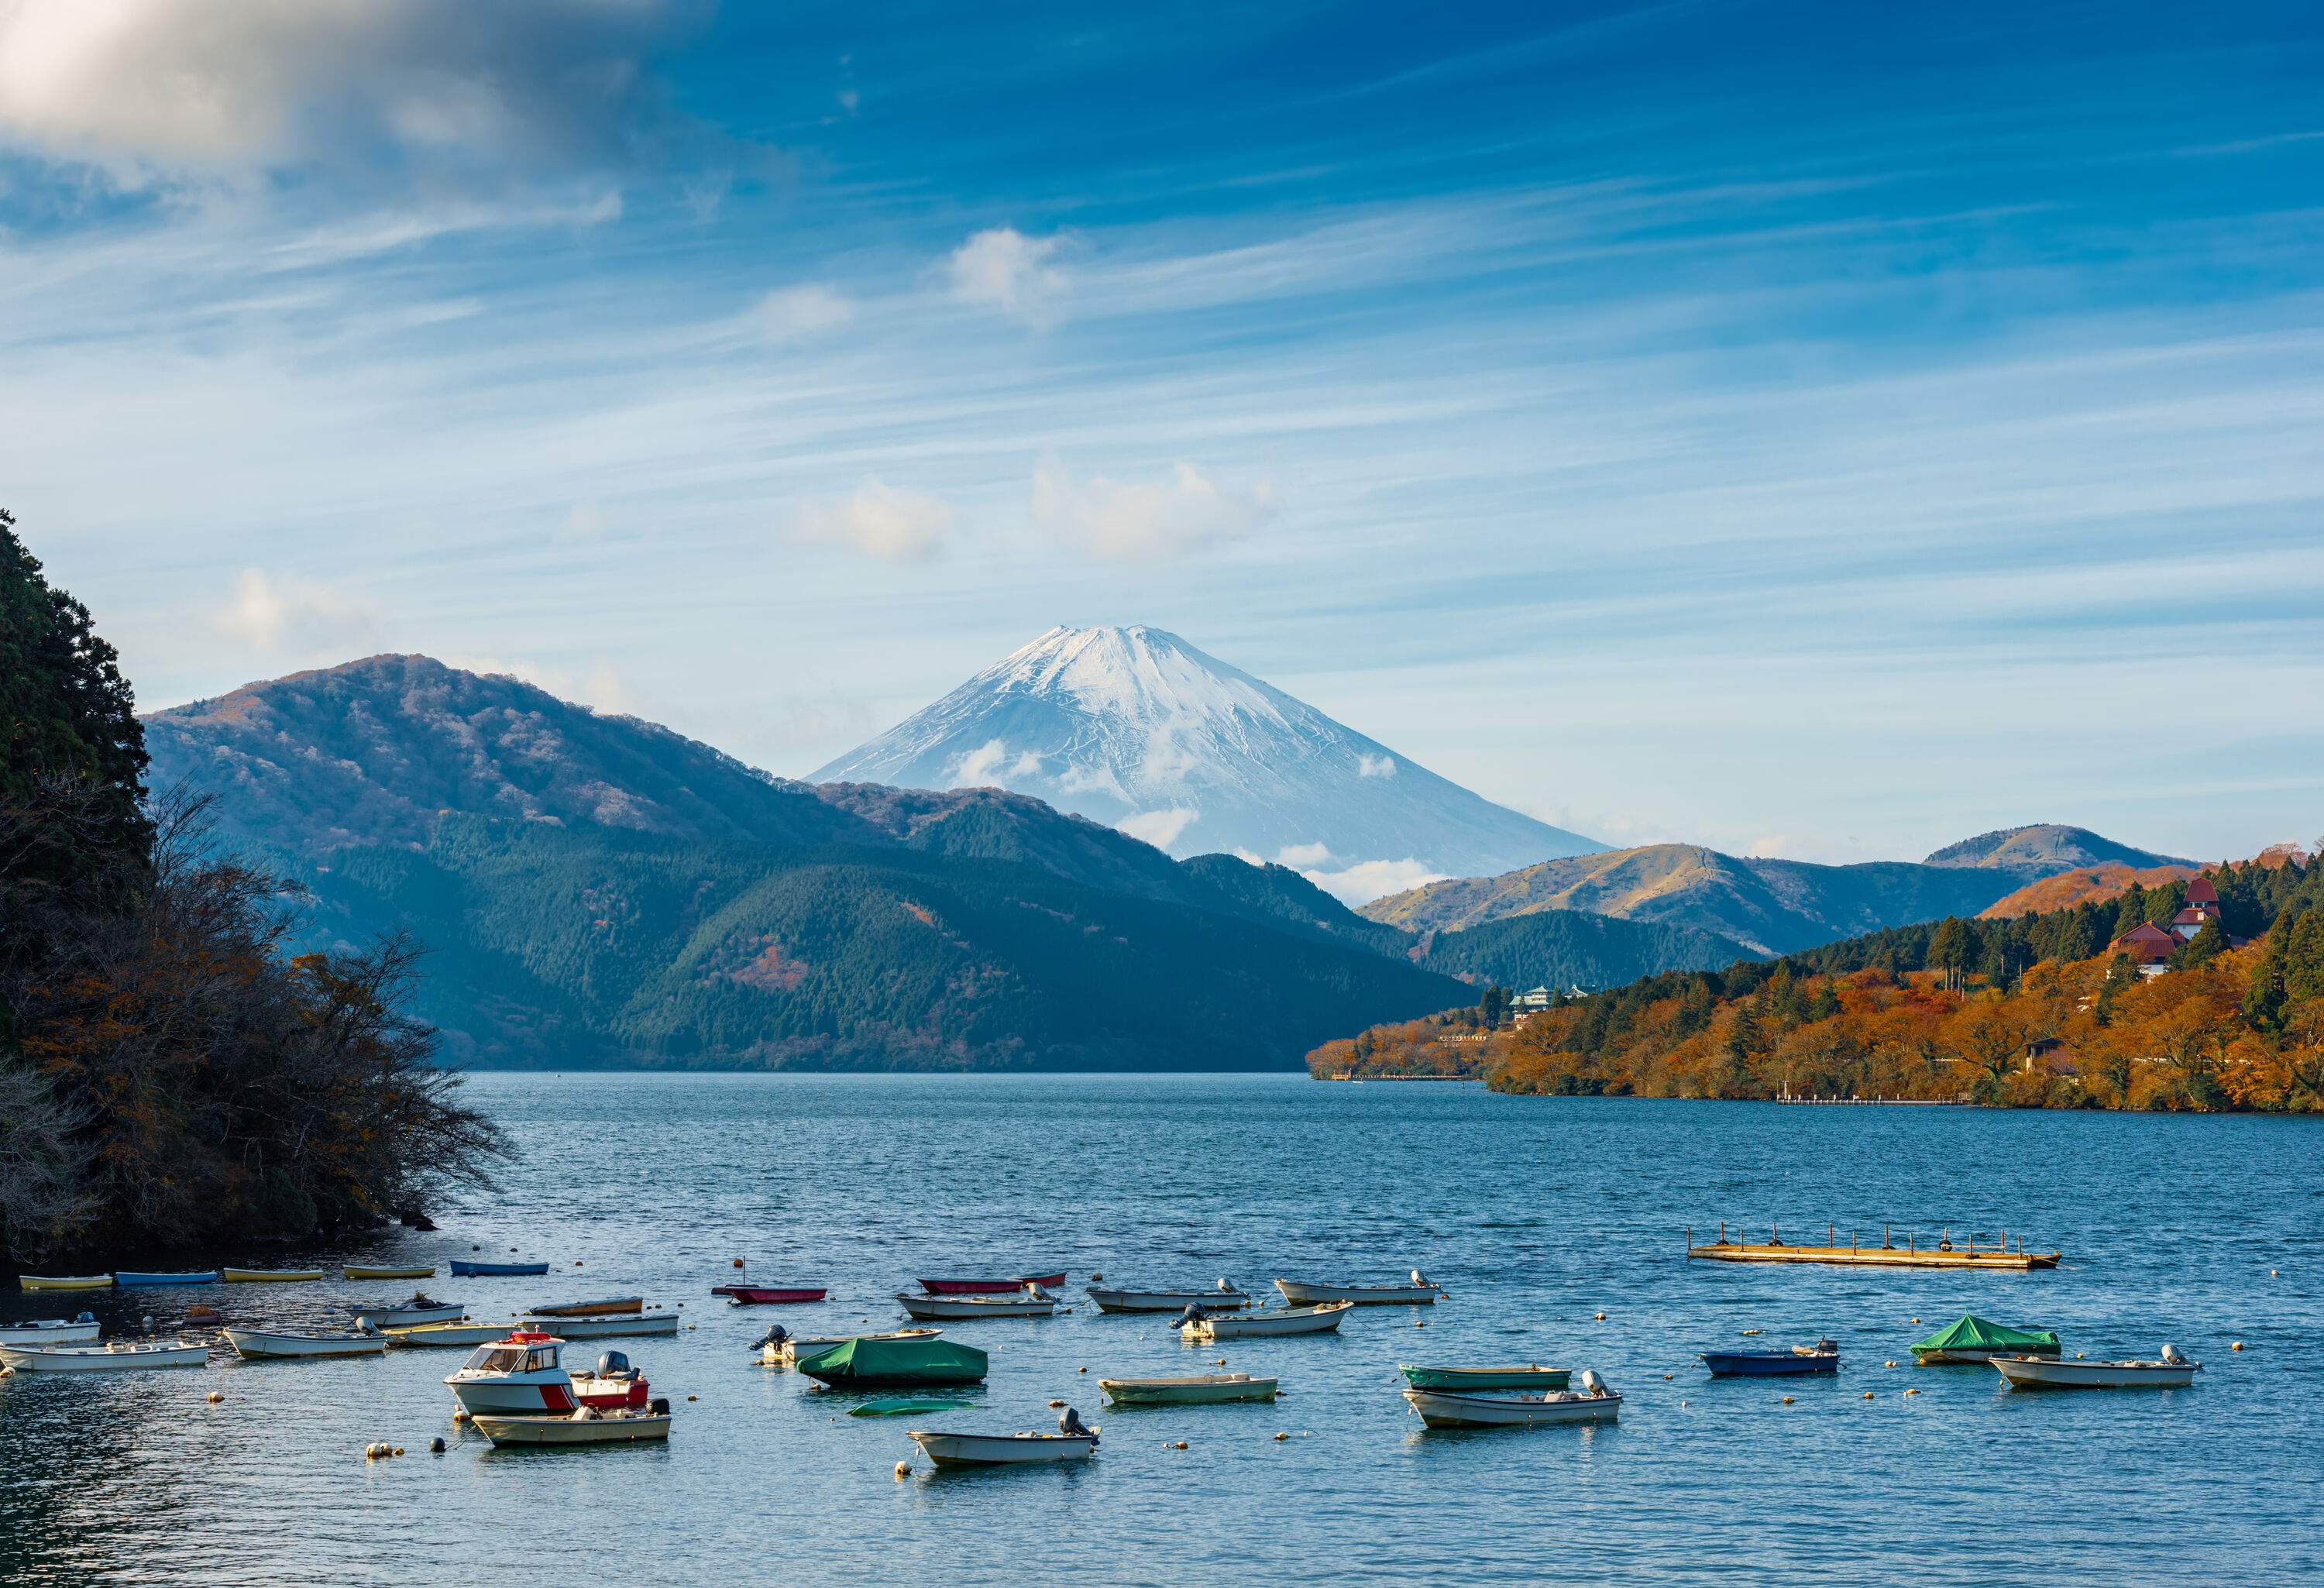 Several unoccupied boats on a lake, with the view of autumn trees on mountains and the snow-capped Mt. Fuji in the background.